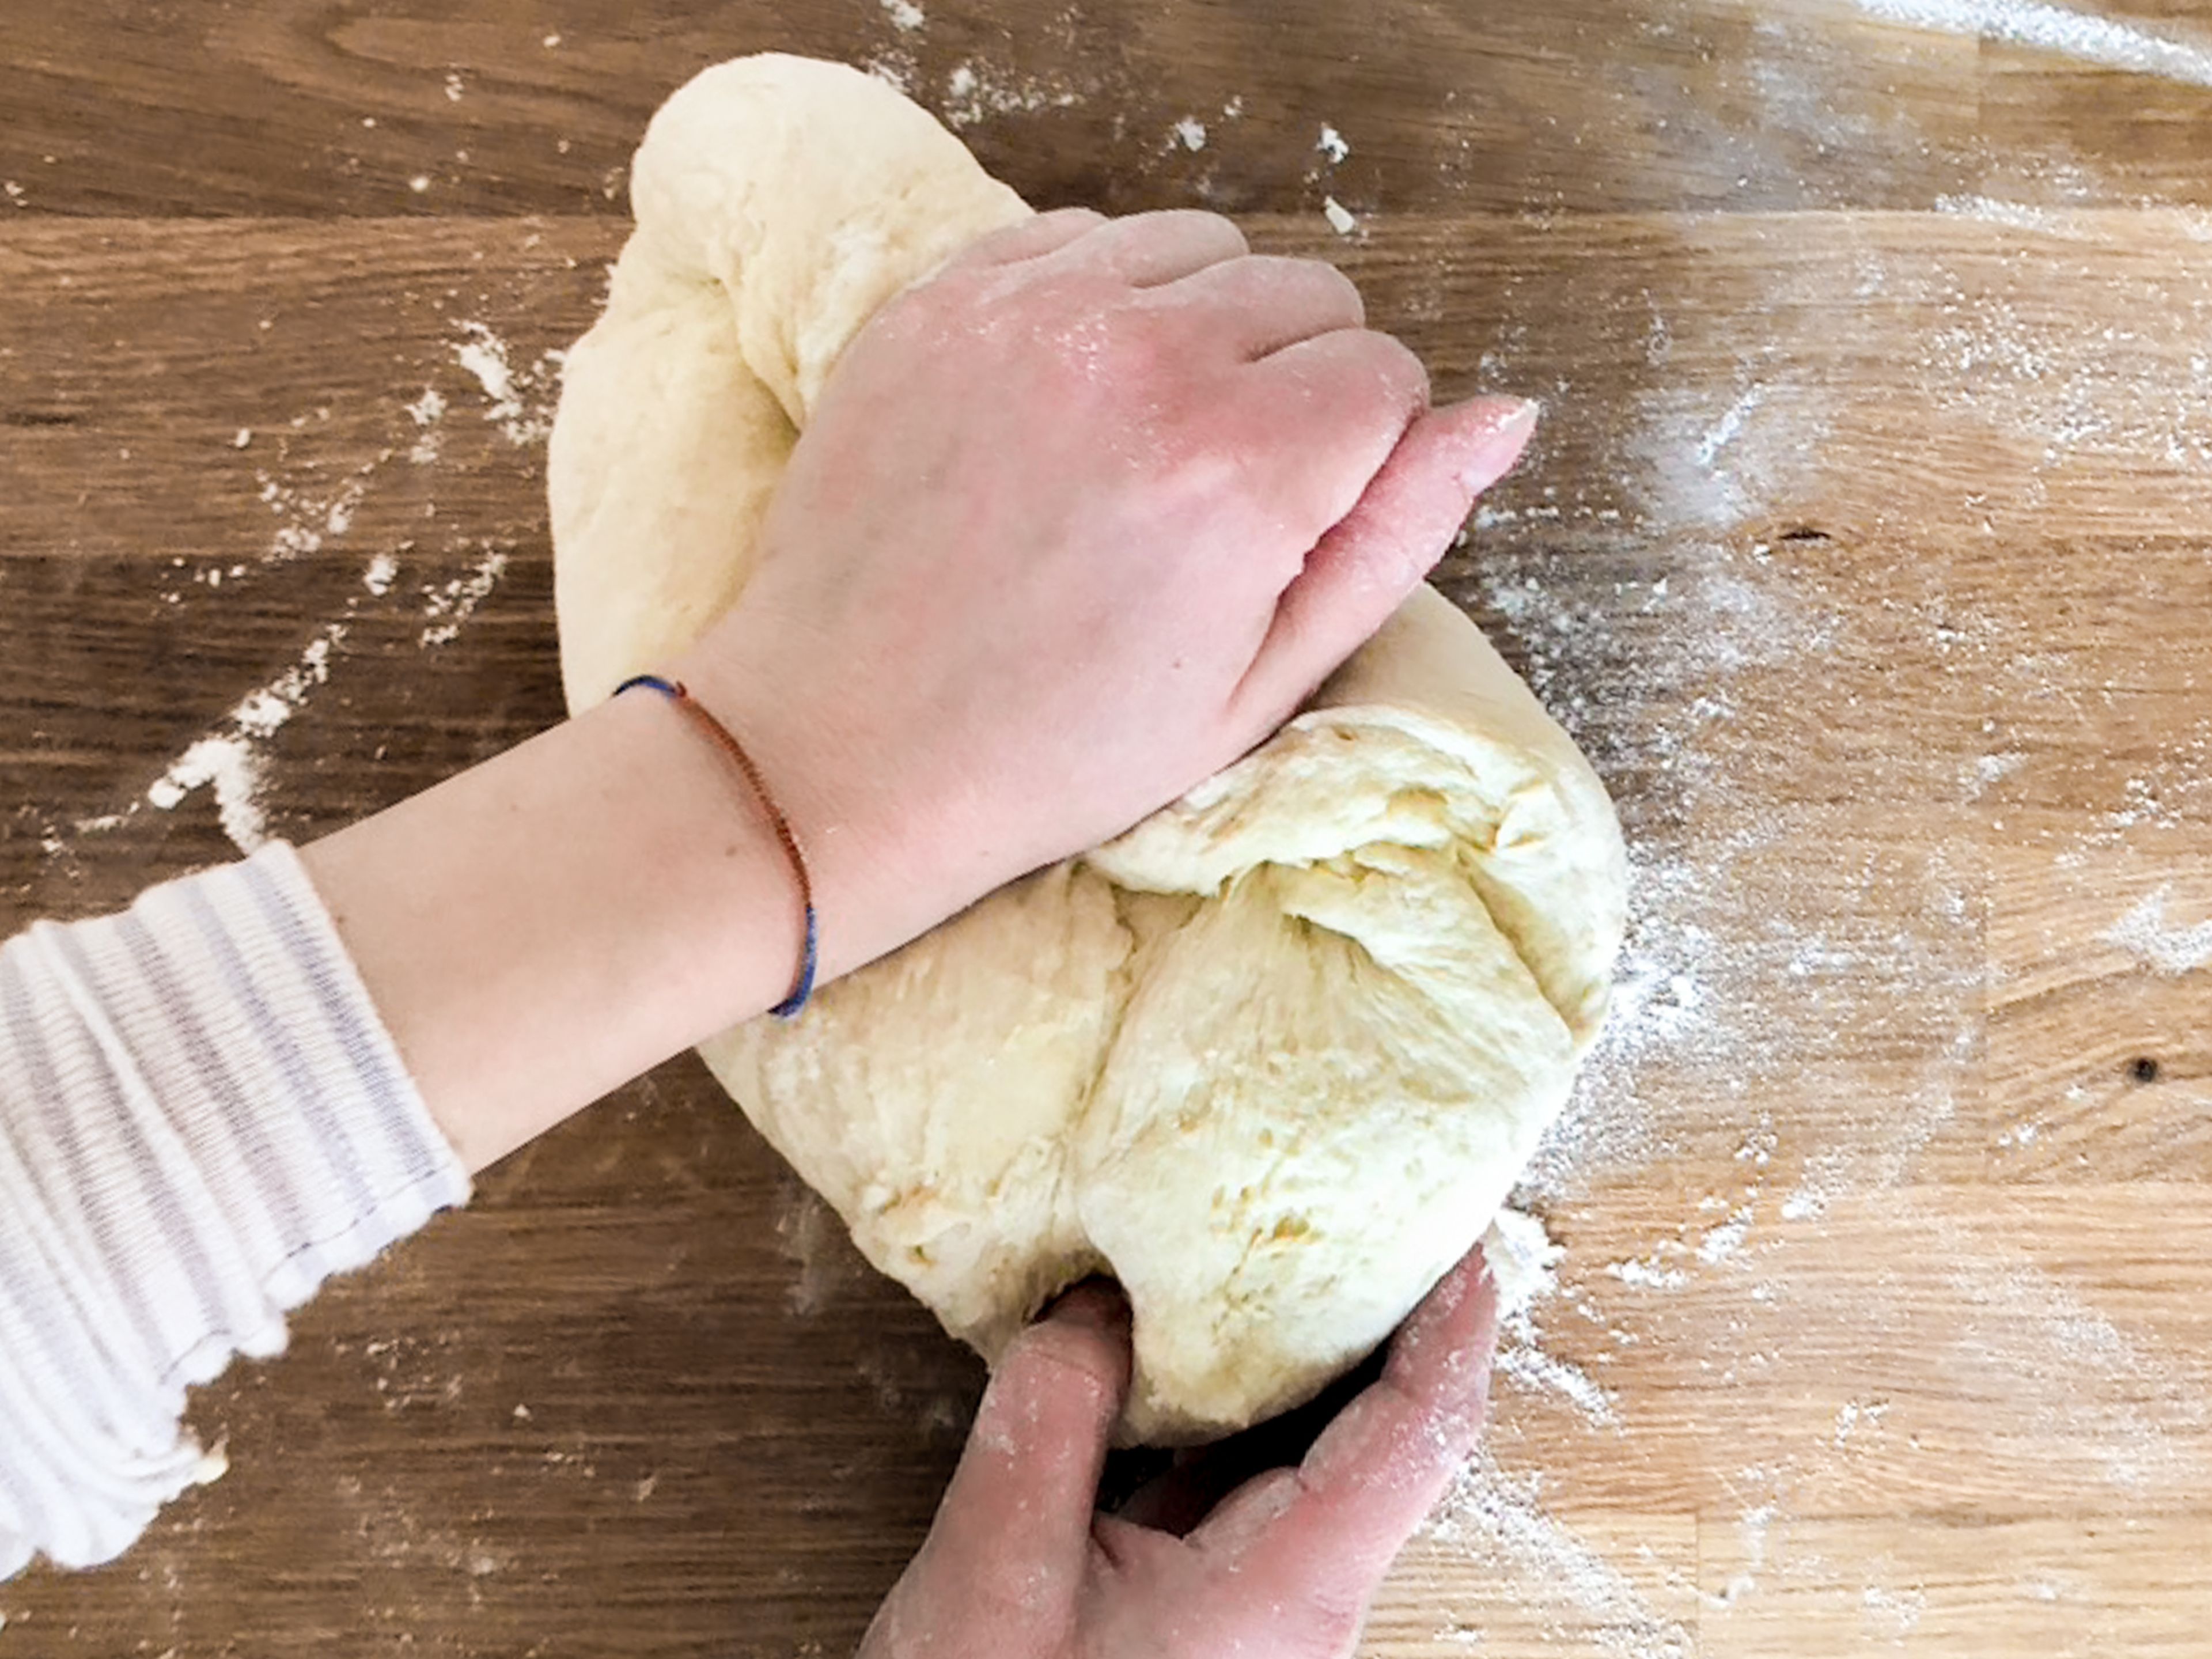 When the dough has risen and doubled in size, add the milk, sugar, flour, salt and butter and mix with a hand mixer until nice and smooth. Remove from the bowl and knead for 2-3 minutes on a clean work surface.  Form the finished dough into a square and wrap in cling film. Place in a container and leave to rest in the fridge overnight.